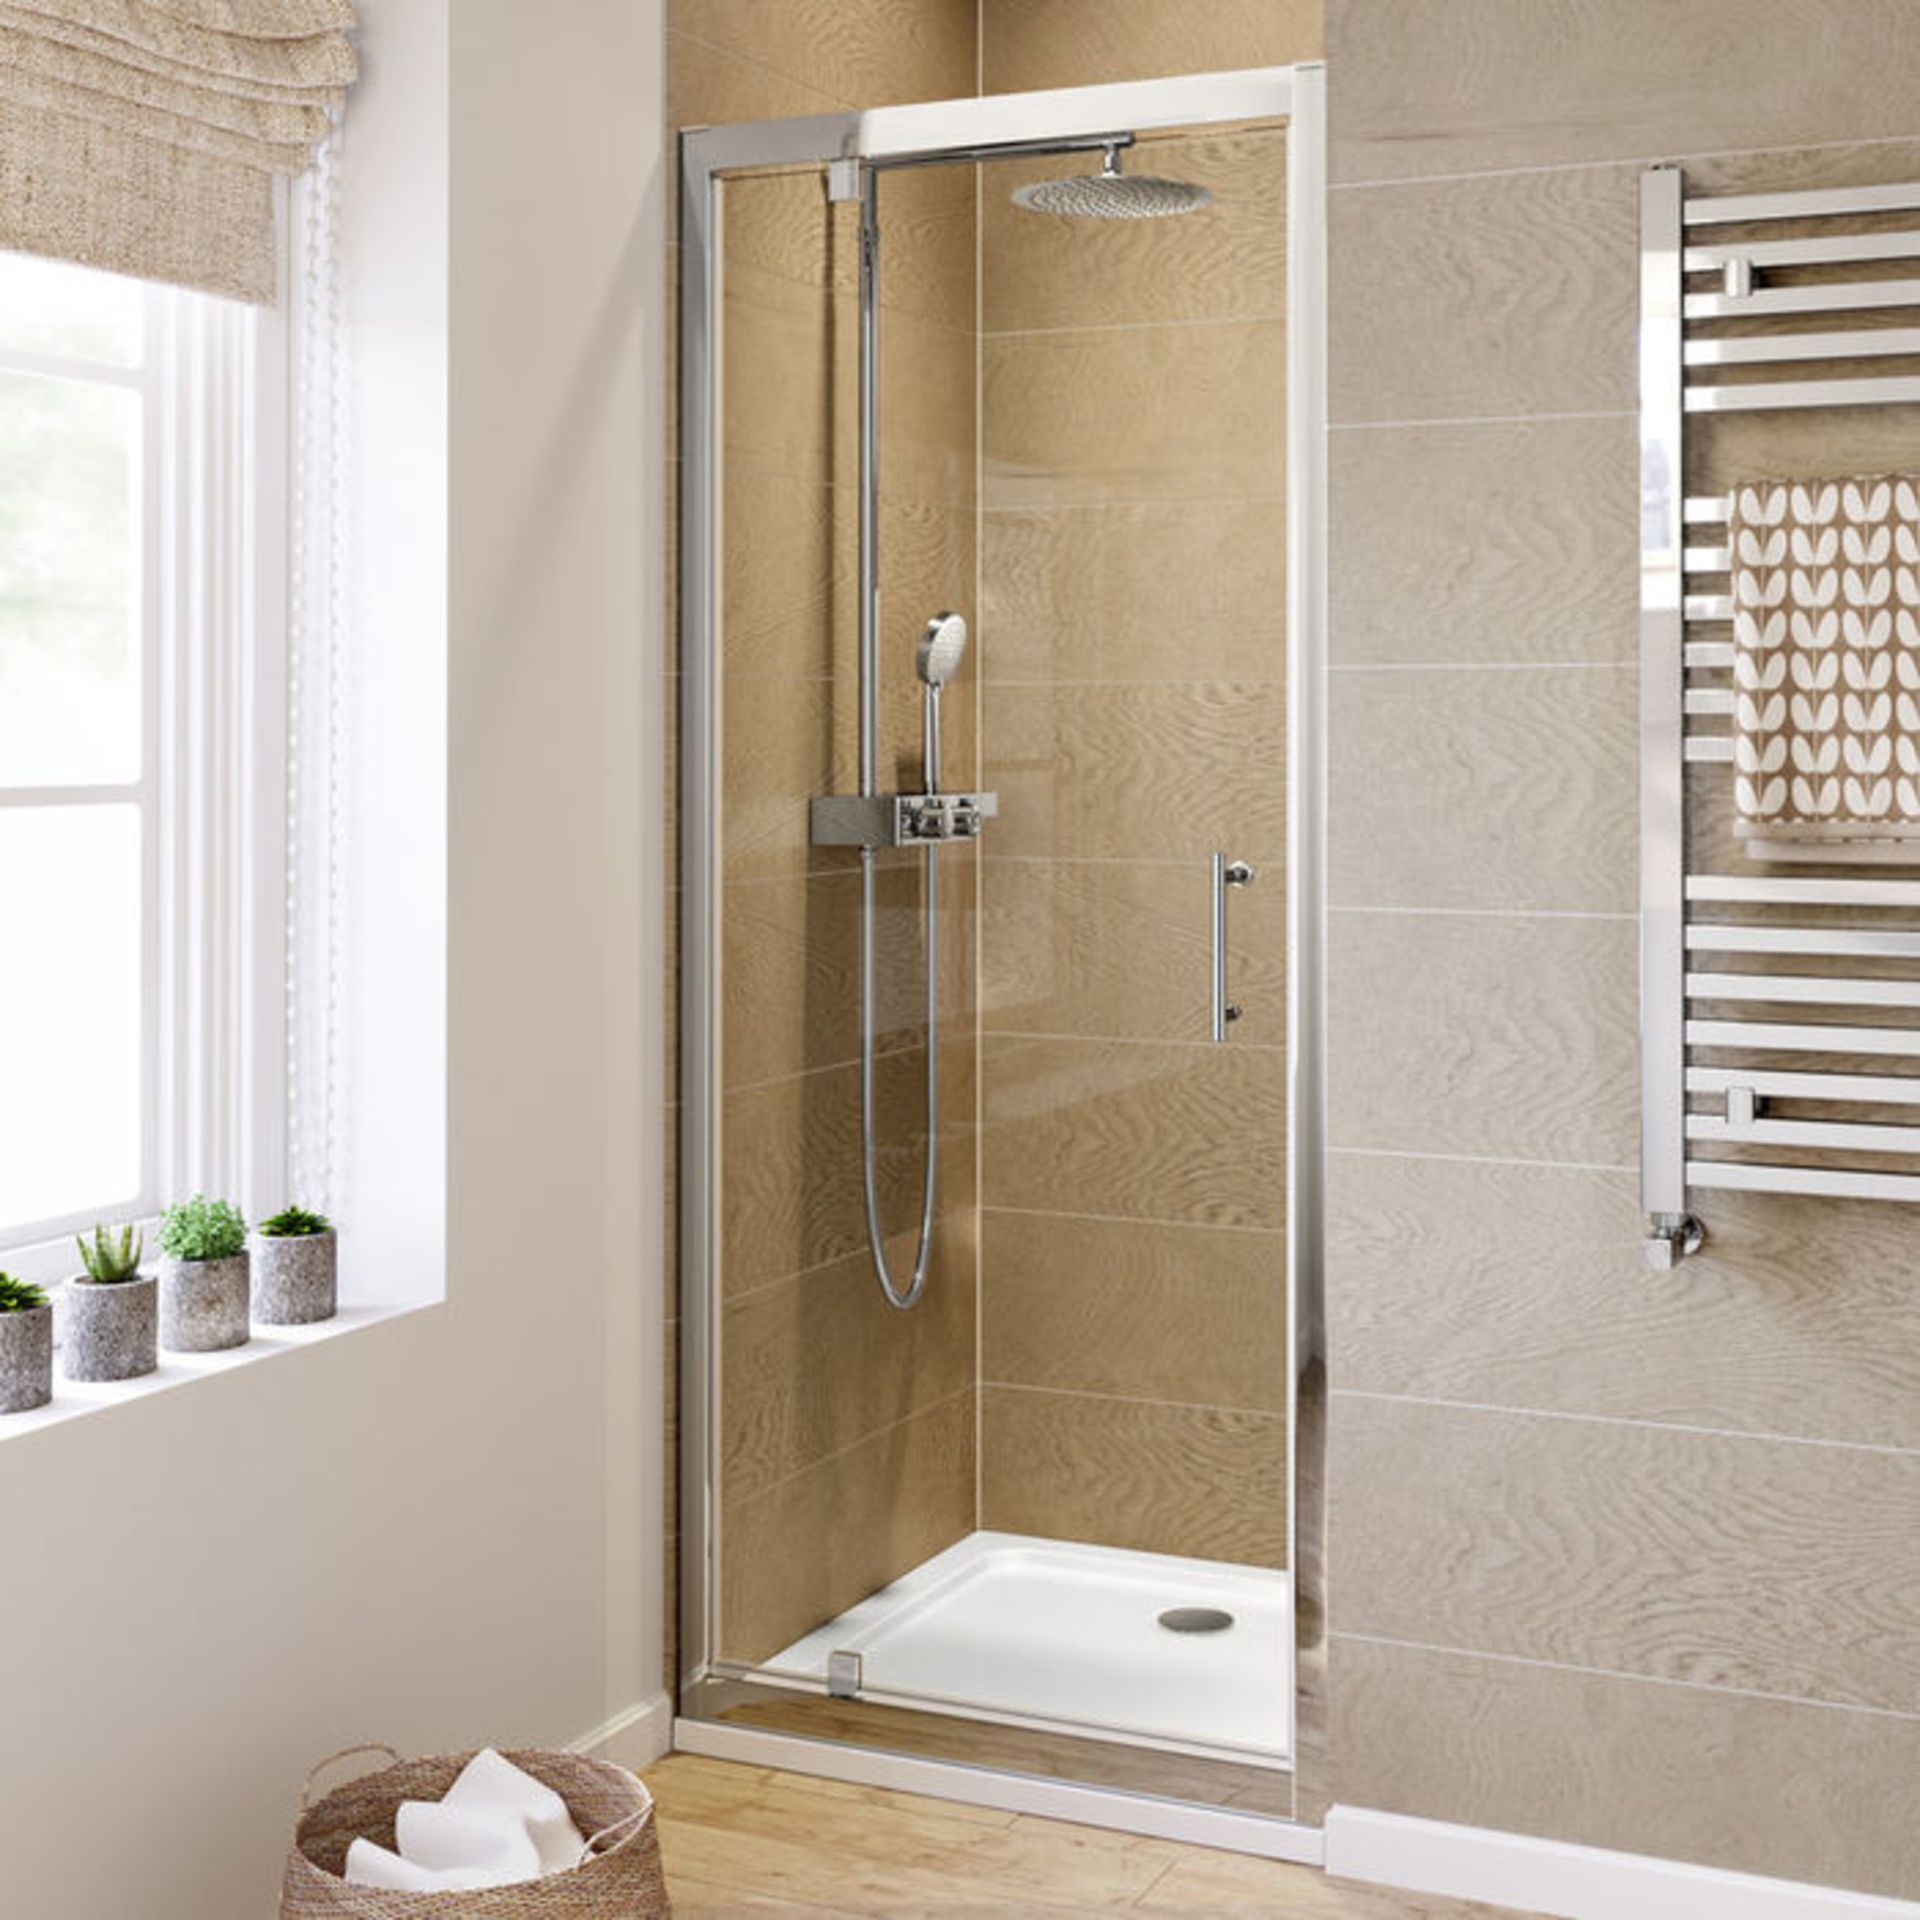 NEW 760mm 6mm - Elements Pivot 760mm Shower Door. RRP £299.99. 6mm Safety Glass Fully waterpro... - Image 2 of 3